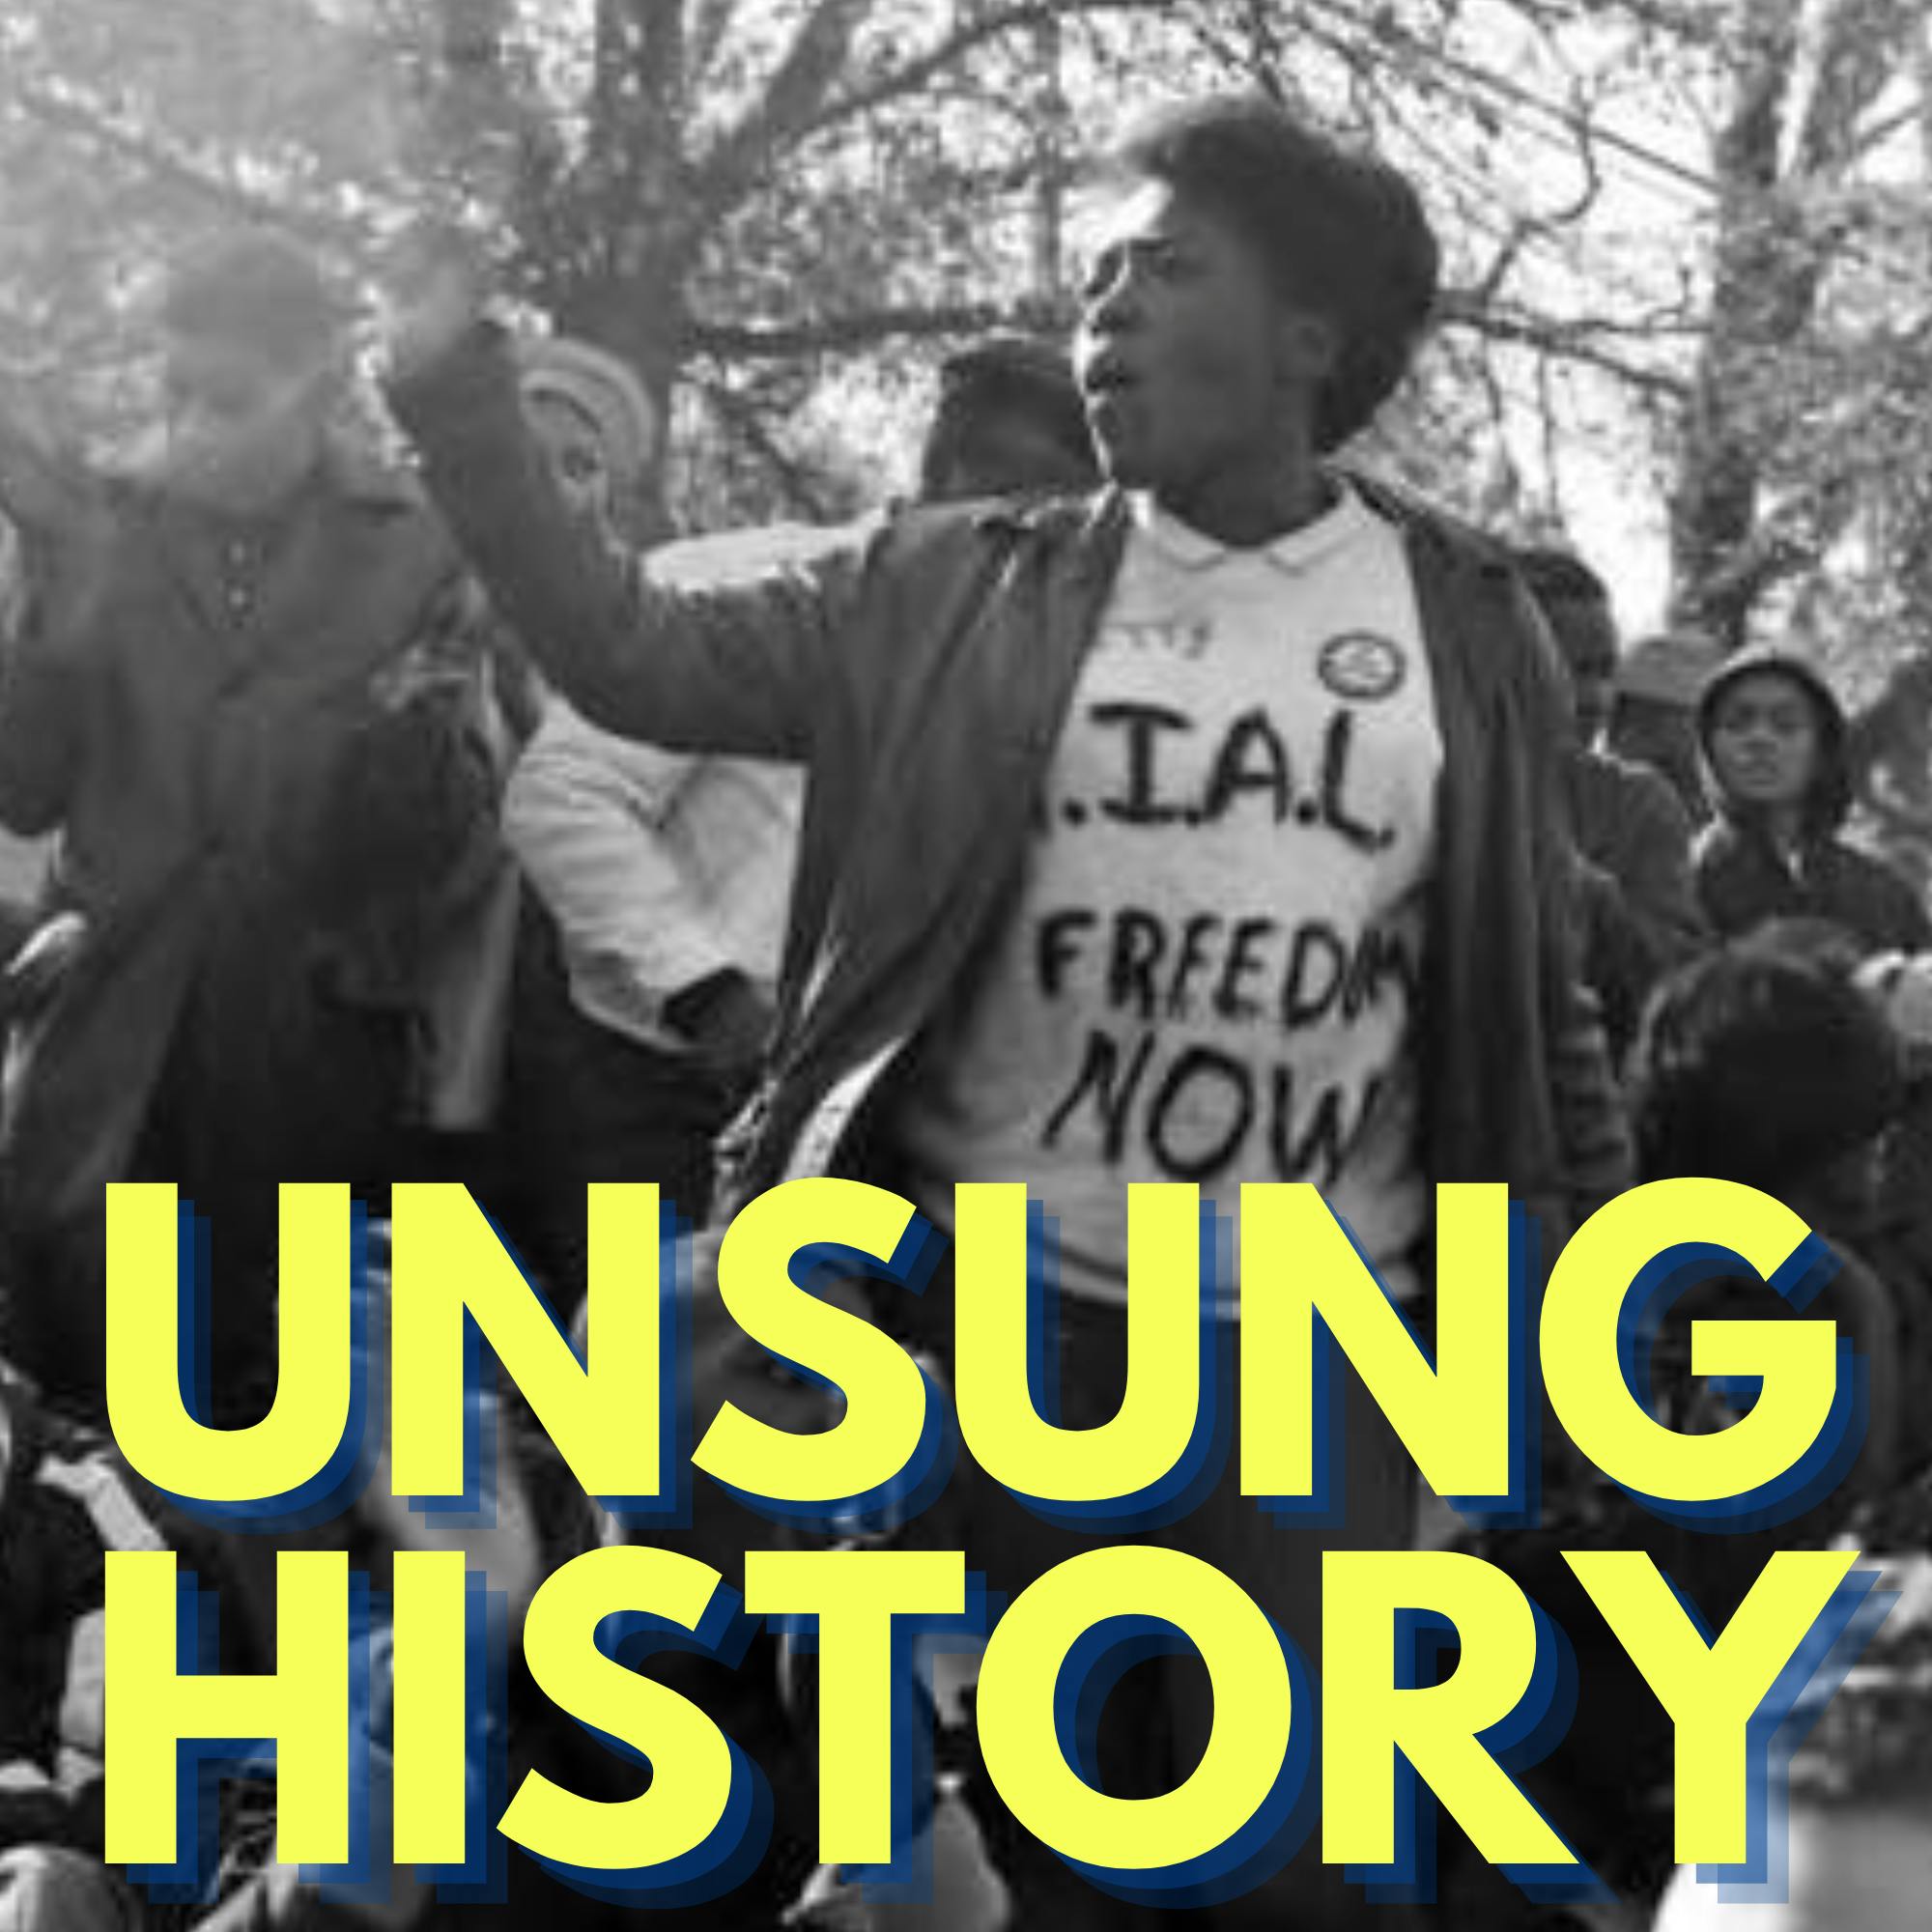 The 1968 Student Uprising at Tuskegee Institute